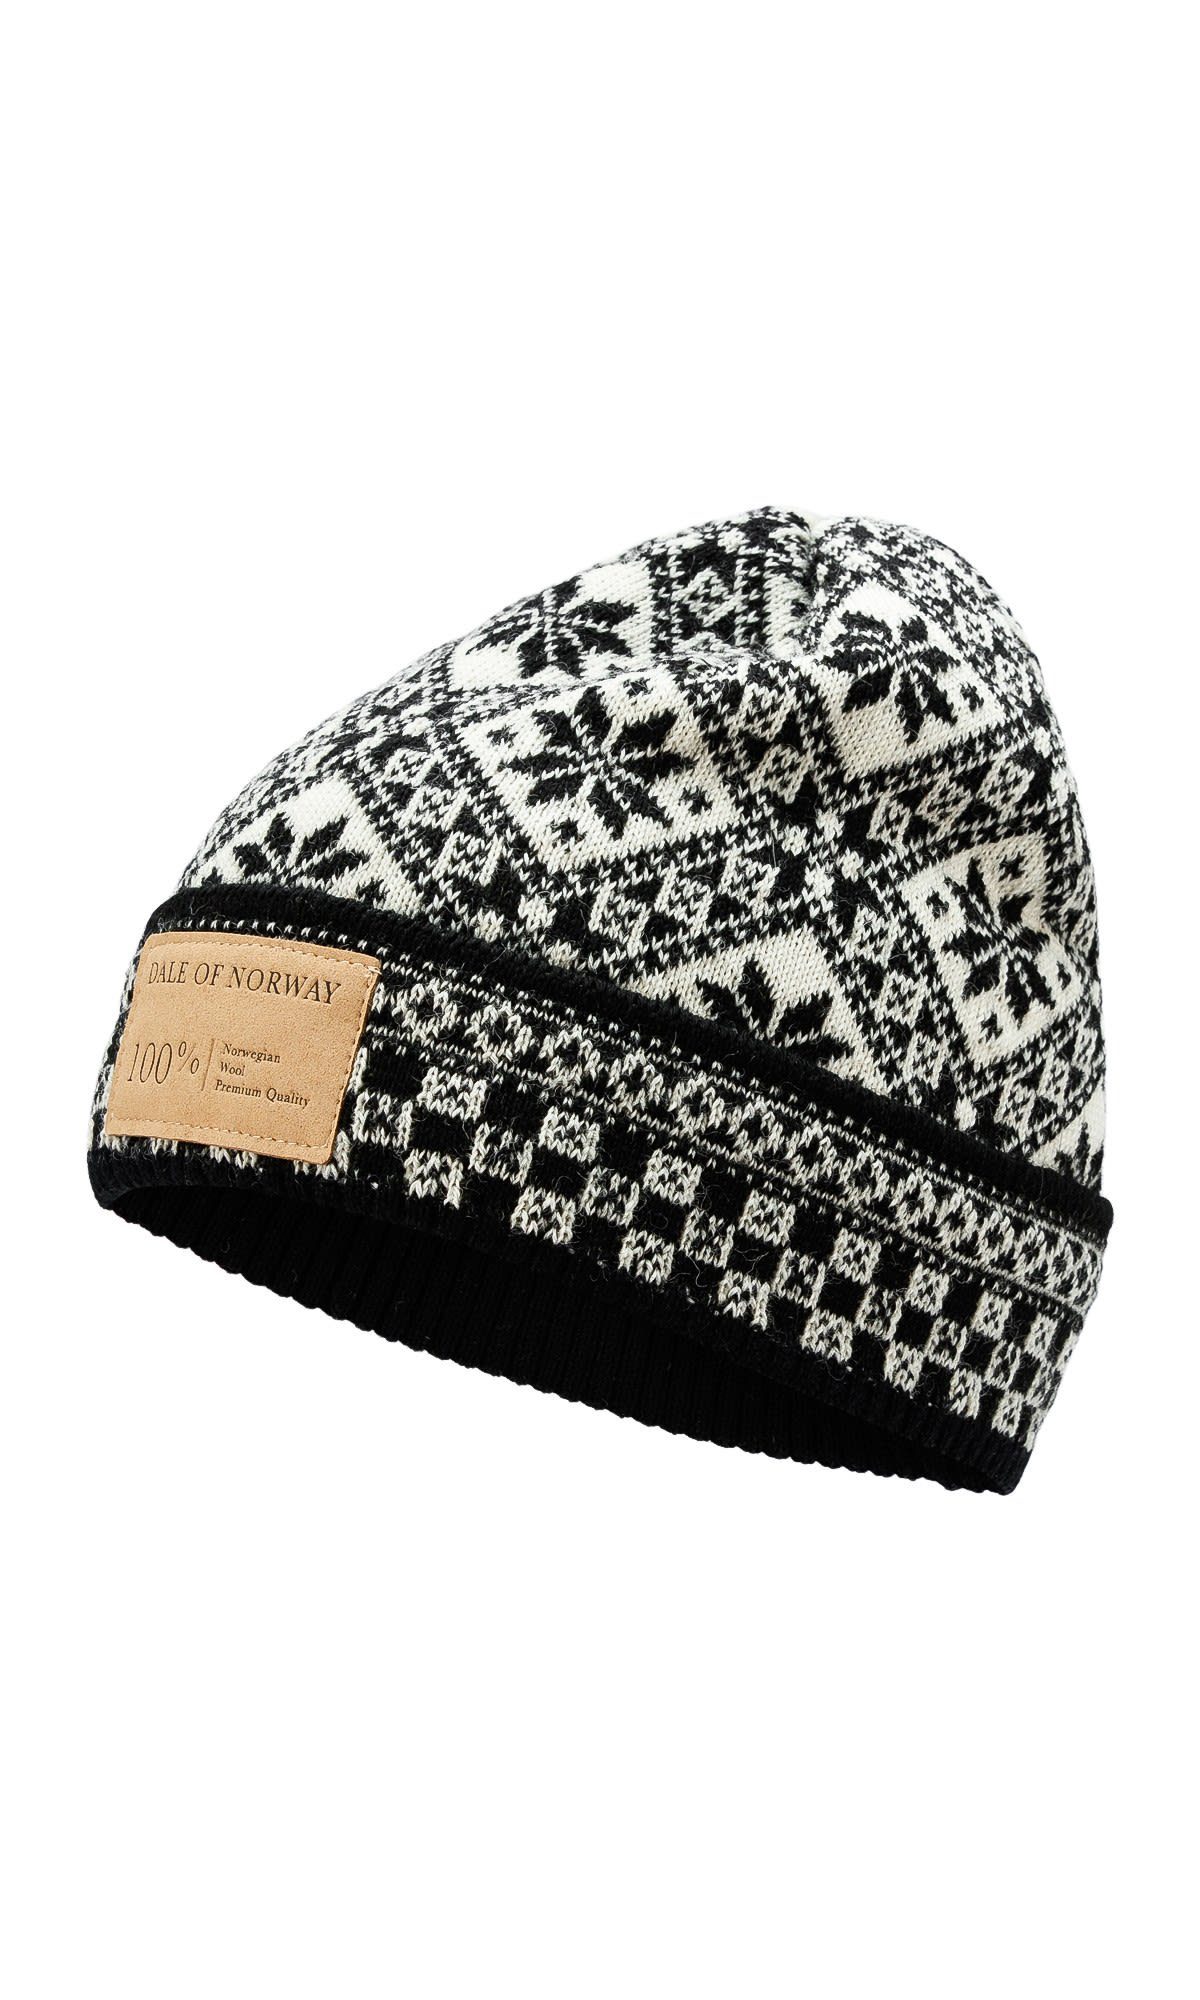 Norway Accessoires Of Offwhite Beanie Dale of Norway Hat Bjoroy Black Dale